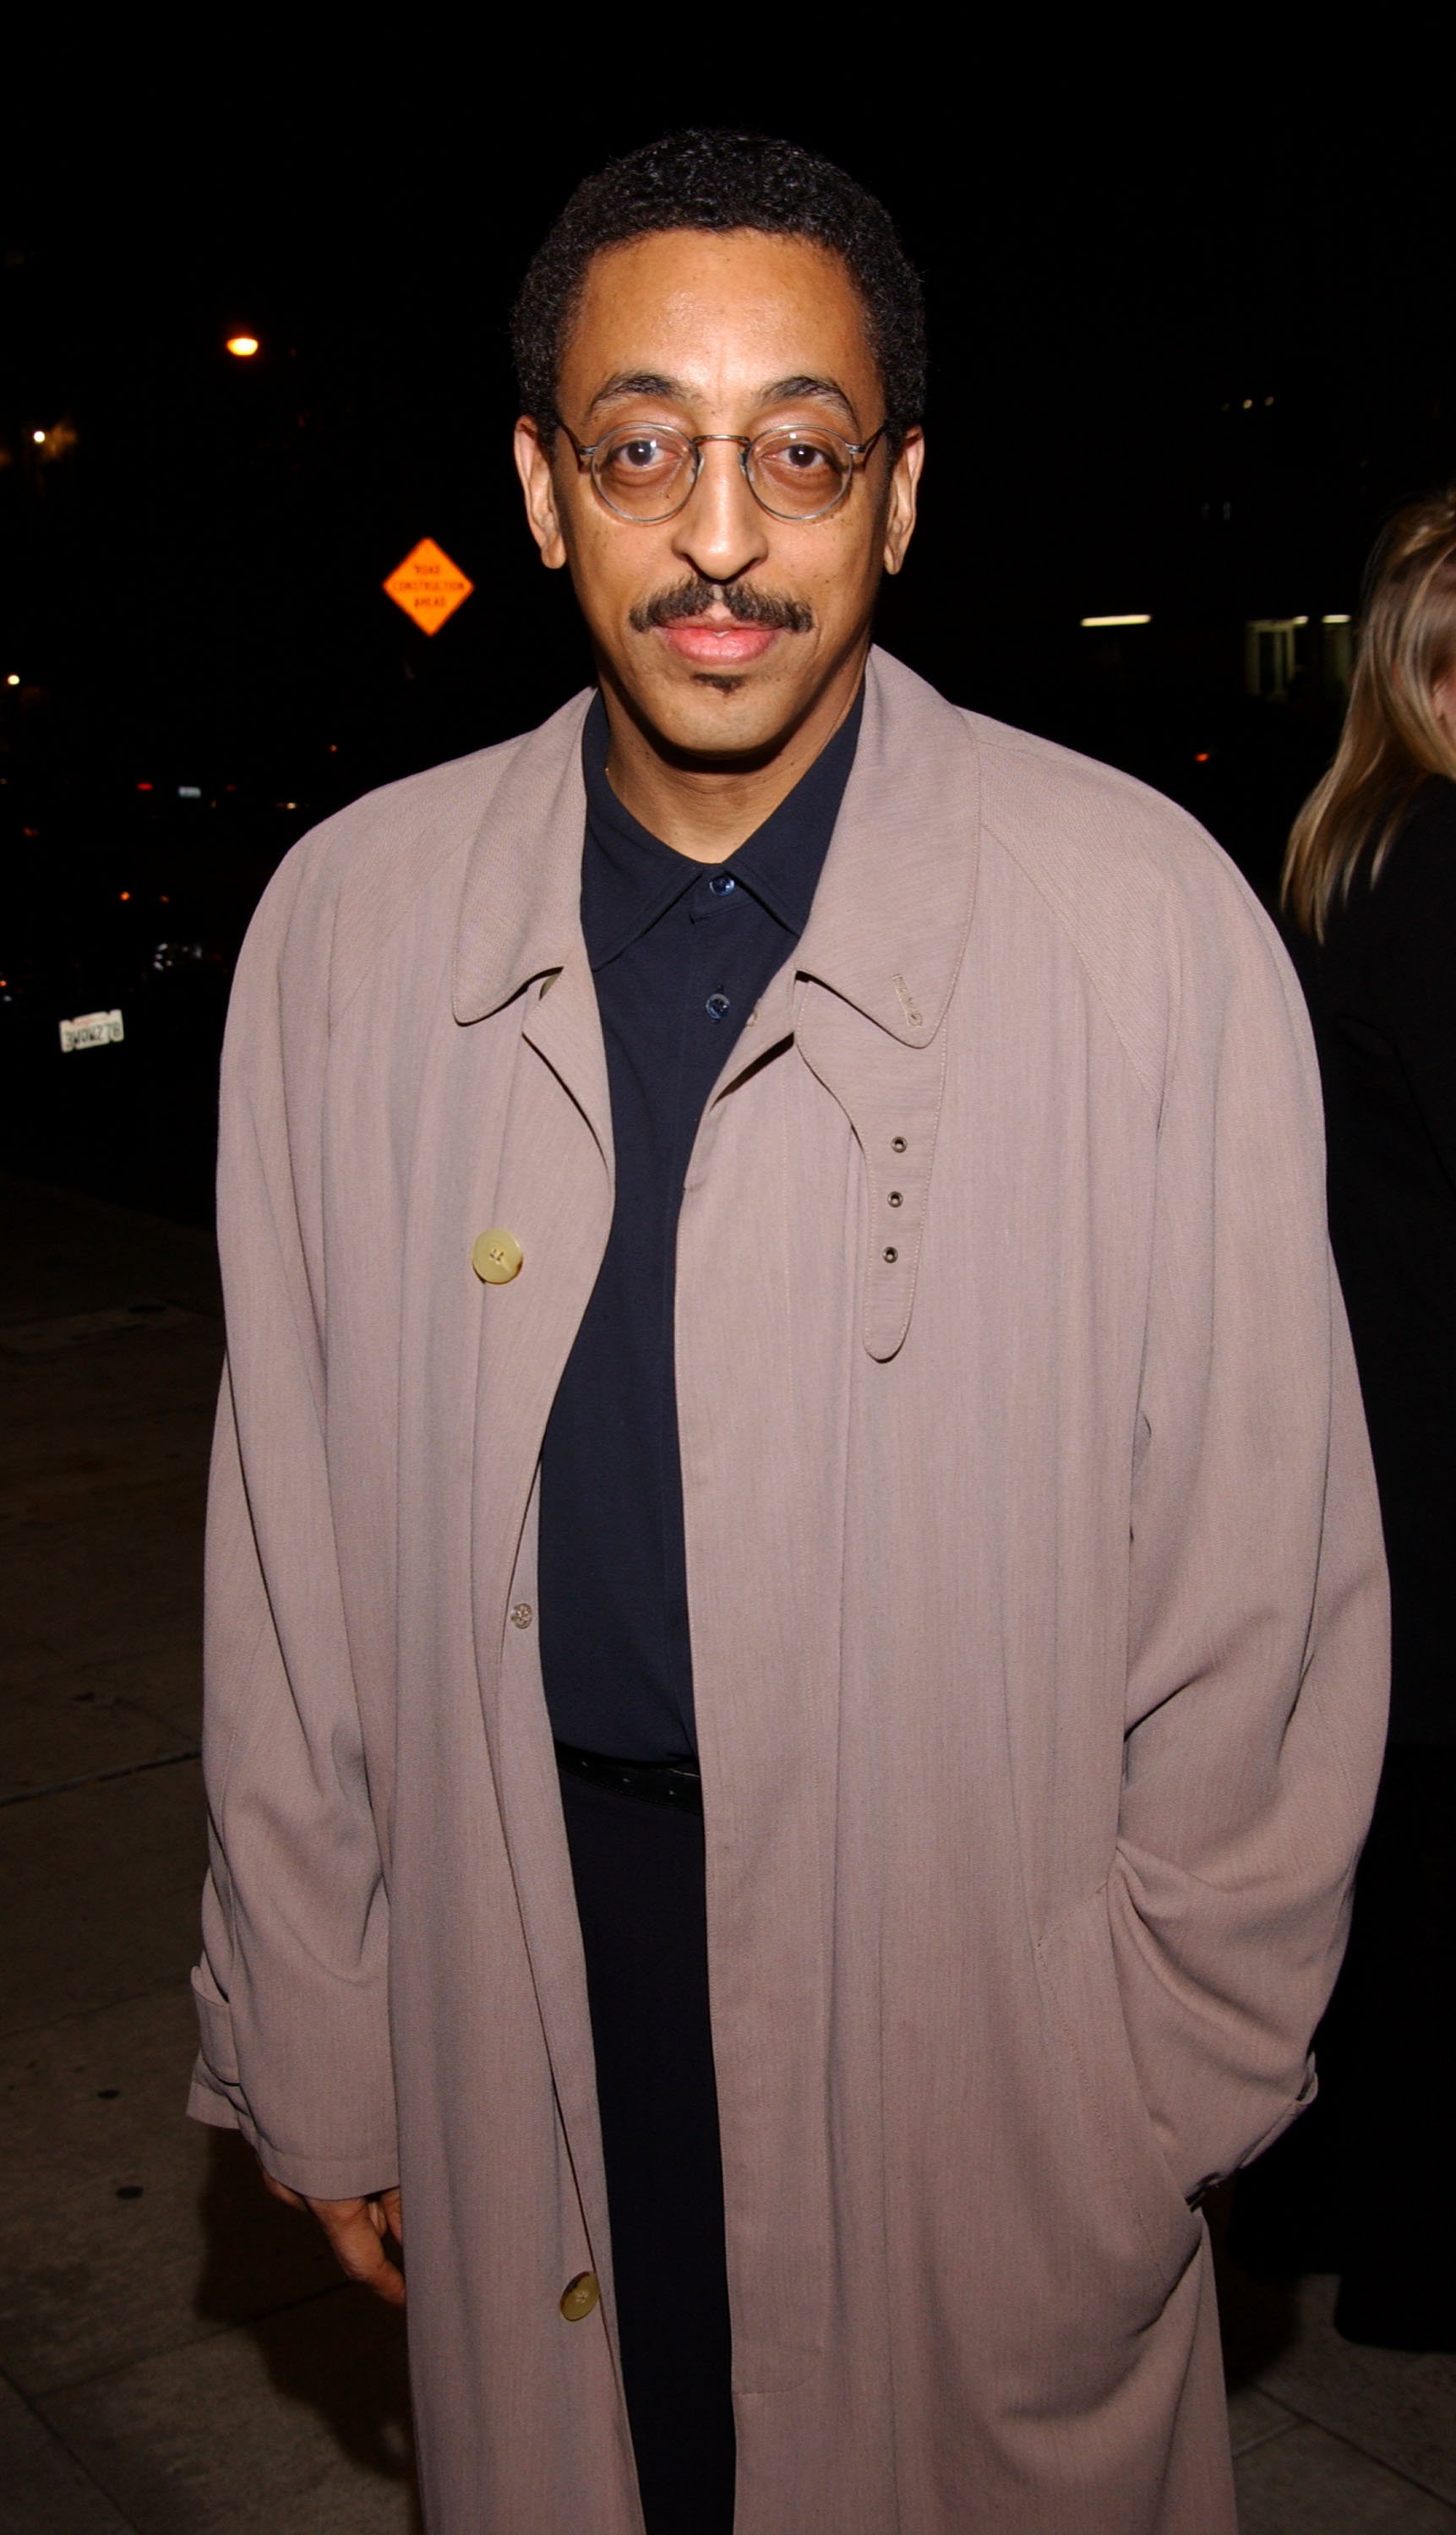 Gregory Hines arrives at the premiere of Showtime's "The Red Sneakers" on January 29, 2002. | Photo: Getty Images